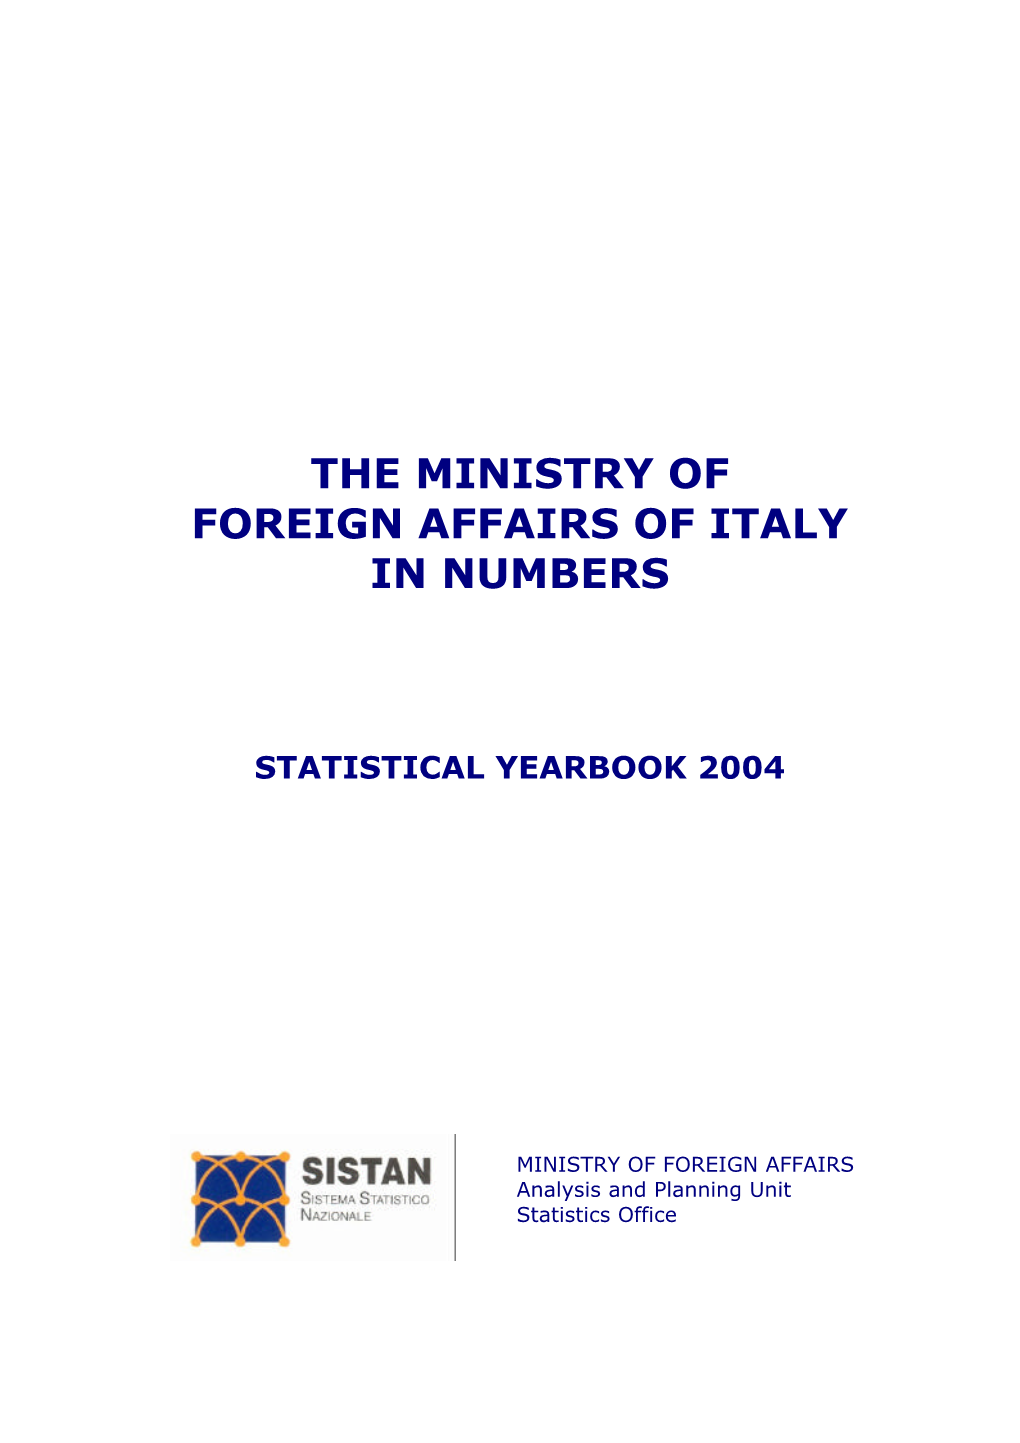 The Ministry of Foreign Affairs of Italy in Numbers